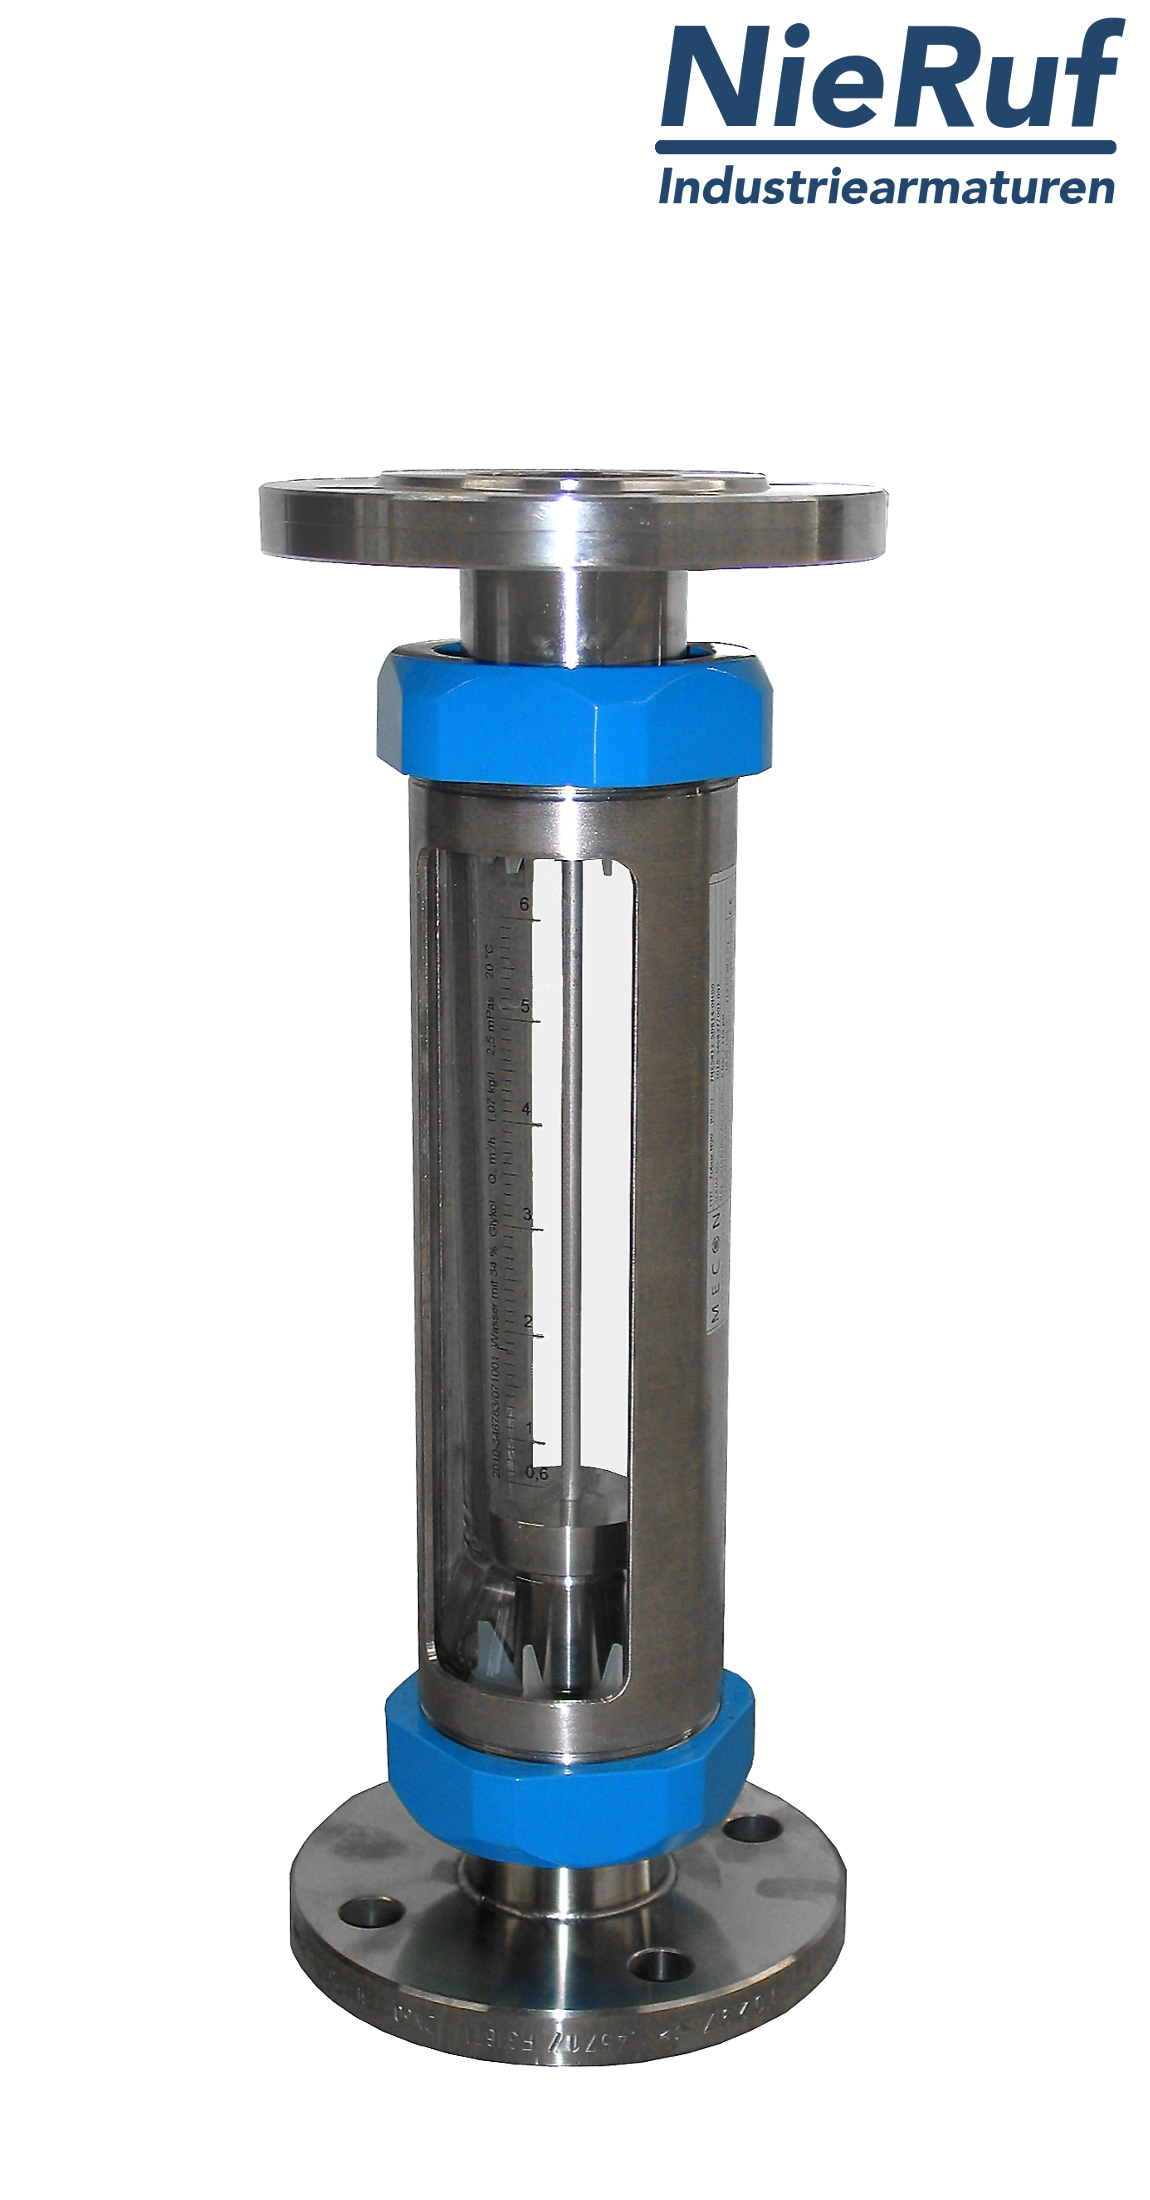 Variable area flowmeter stainless steel + borosilicate flange DN10 16.0 - 160 l/h water FKM